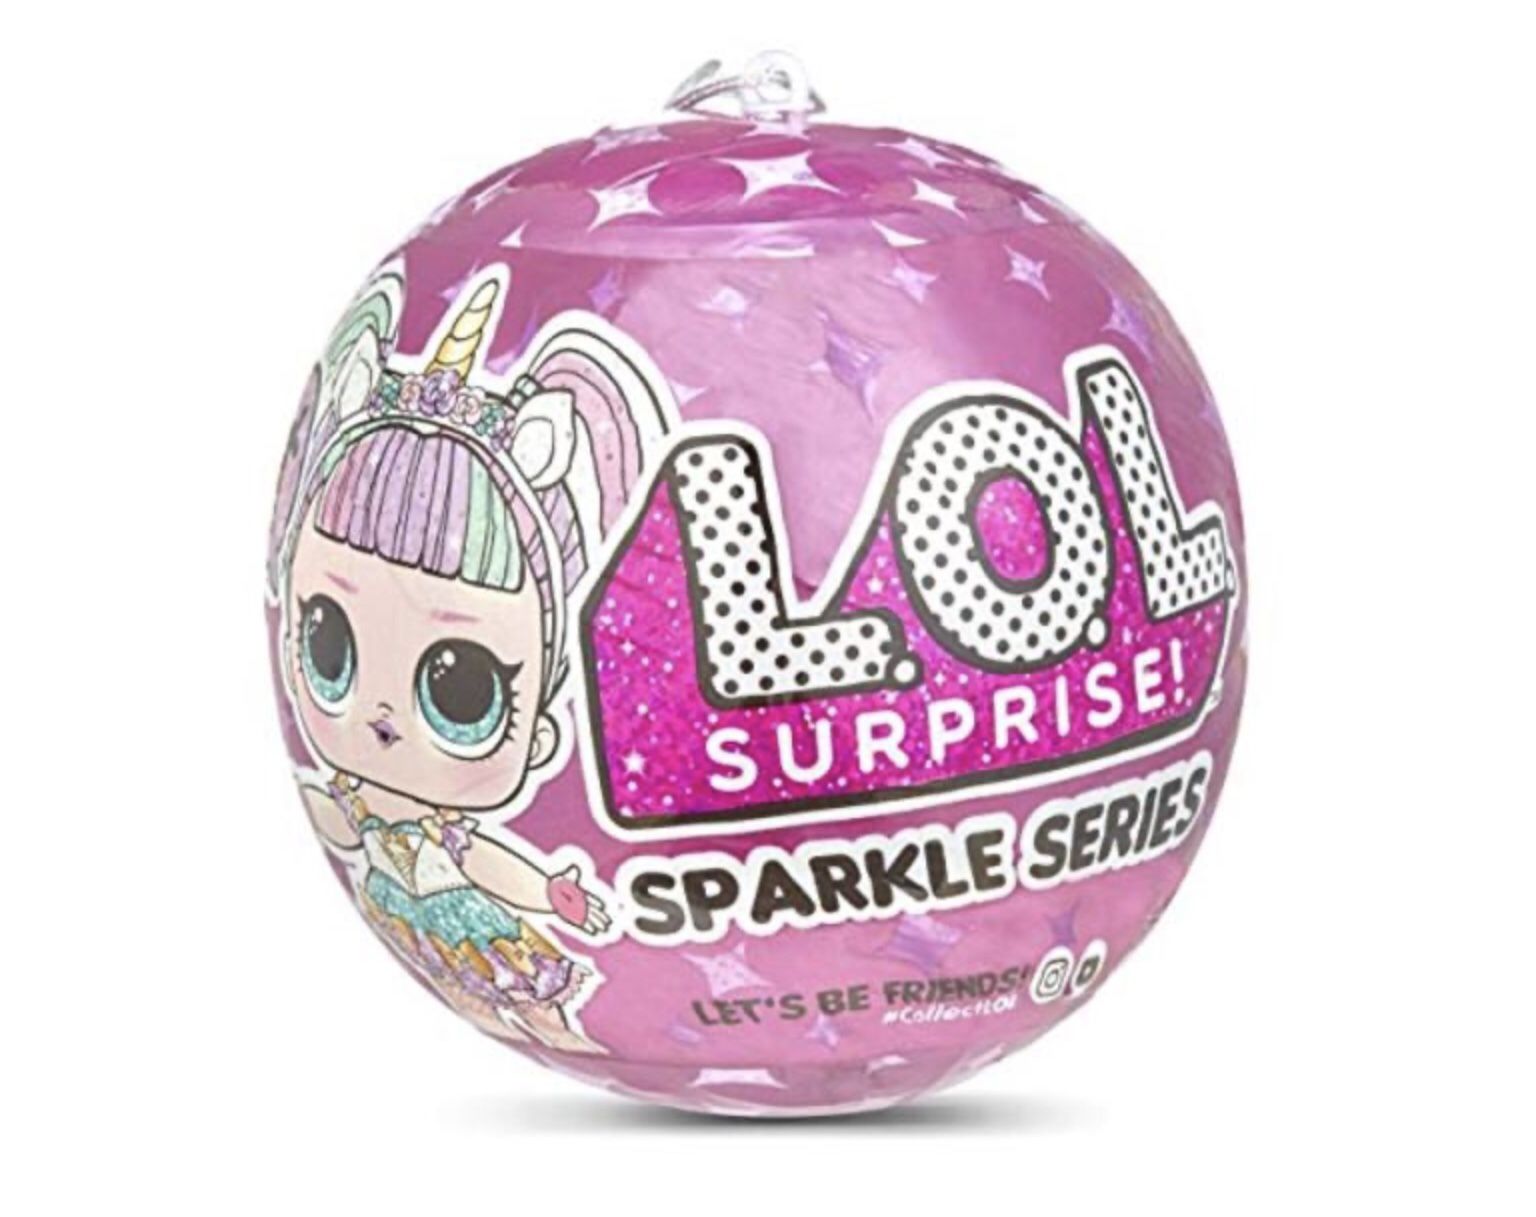 L.O.L. Surprise! Sparkle Series with Glitter Finish and 7 Surprises